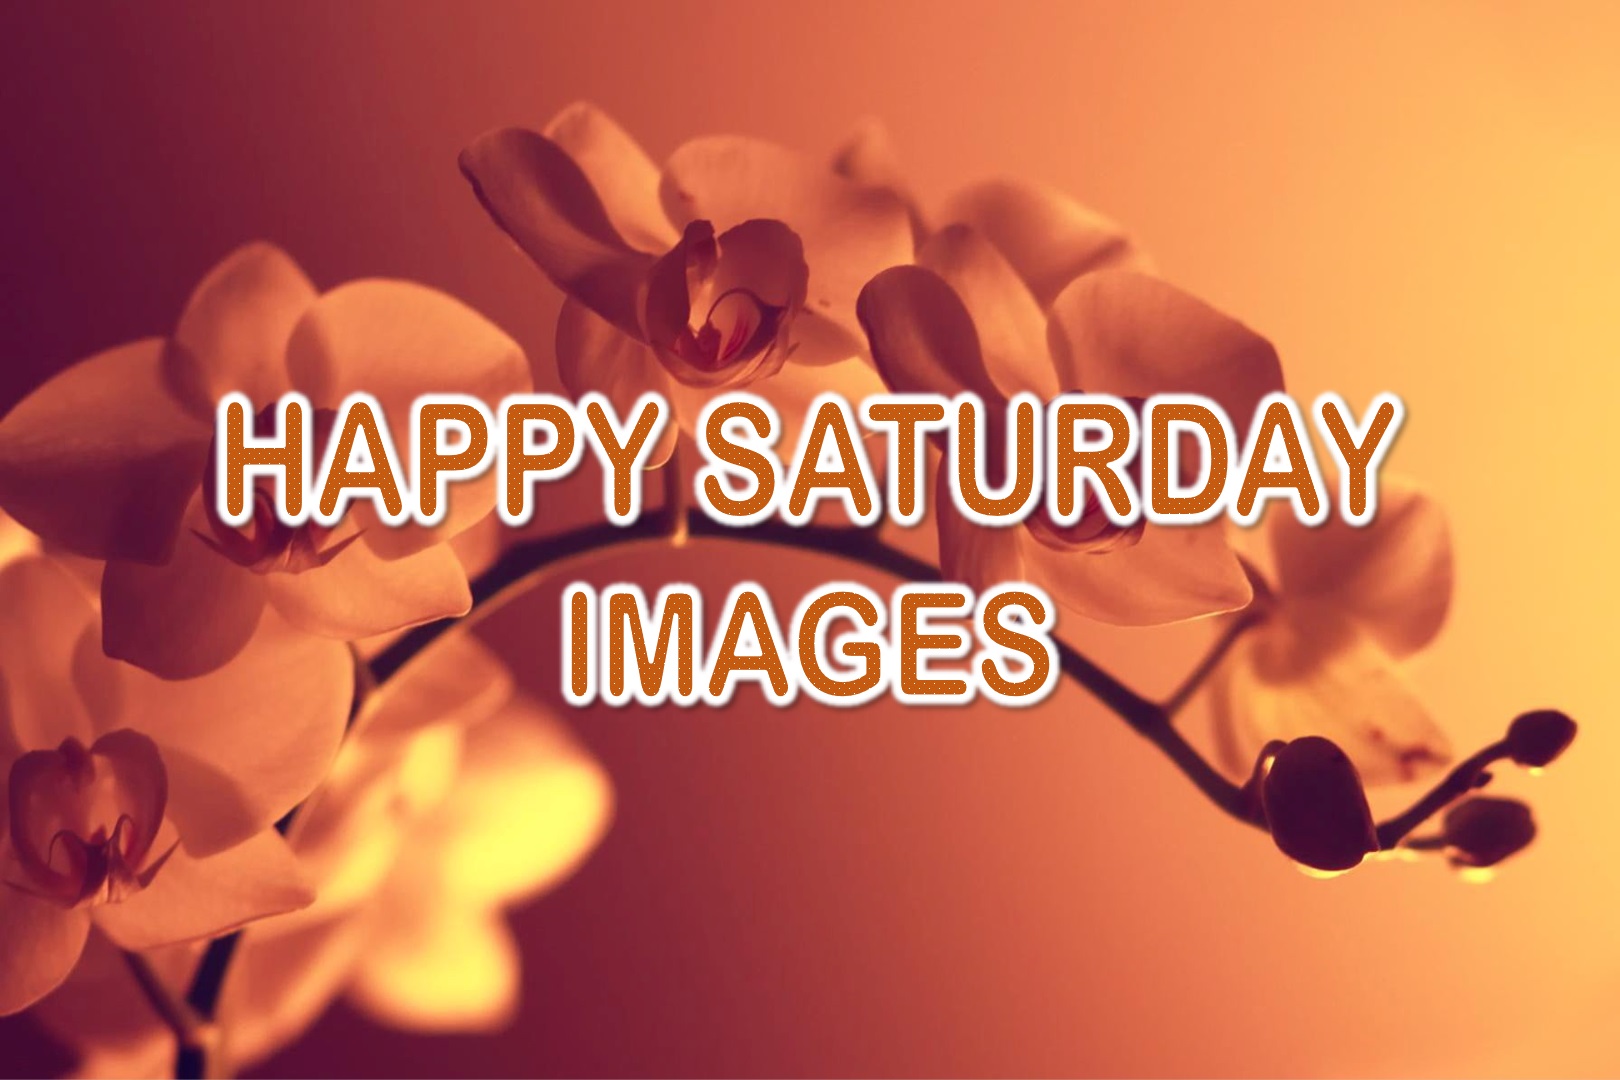 Happy Saturday Images | Beautiful Saturday Pictures | SuperbWishes